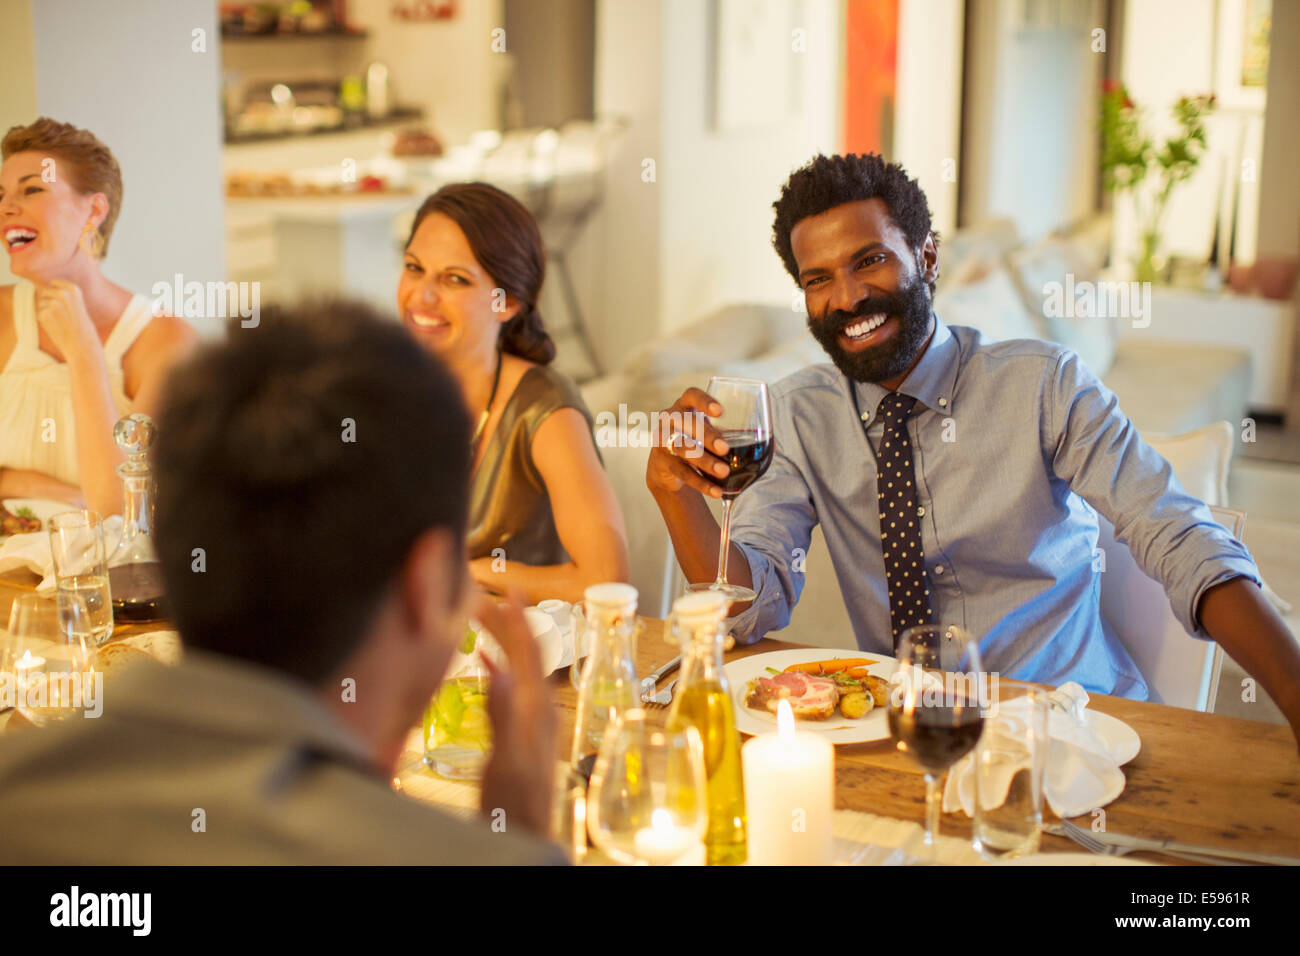 Friends talking at dinner party Stock Photo